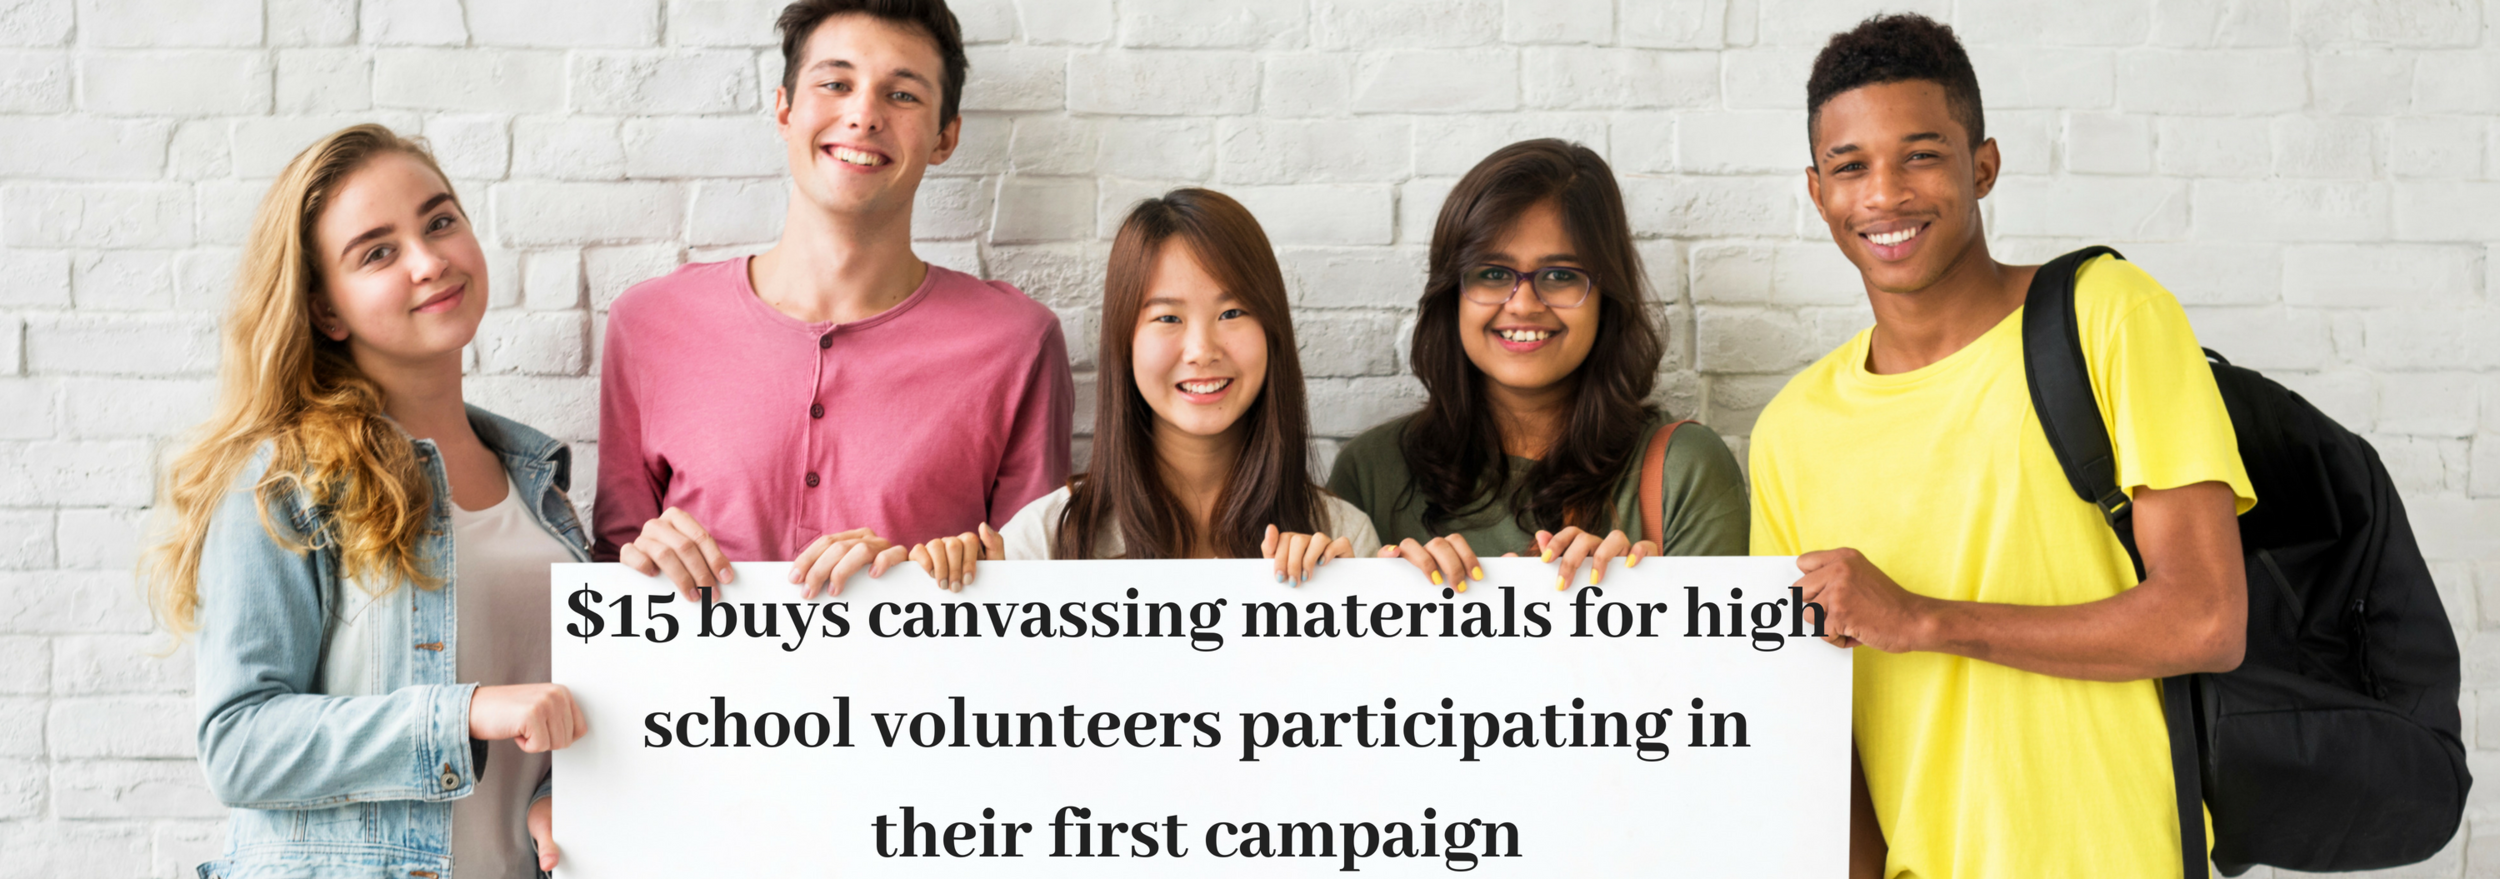 $15 buys canvassing materials for high school volunteers participating in their first campaign.png